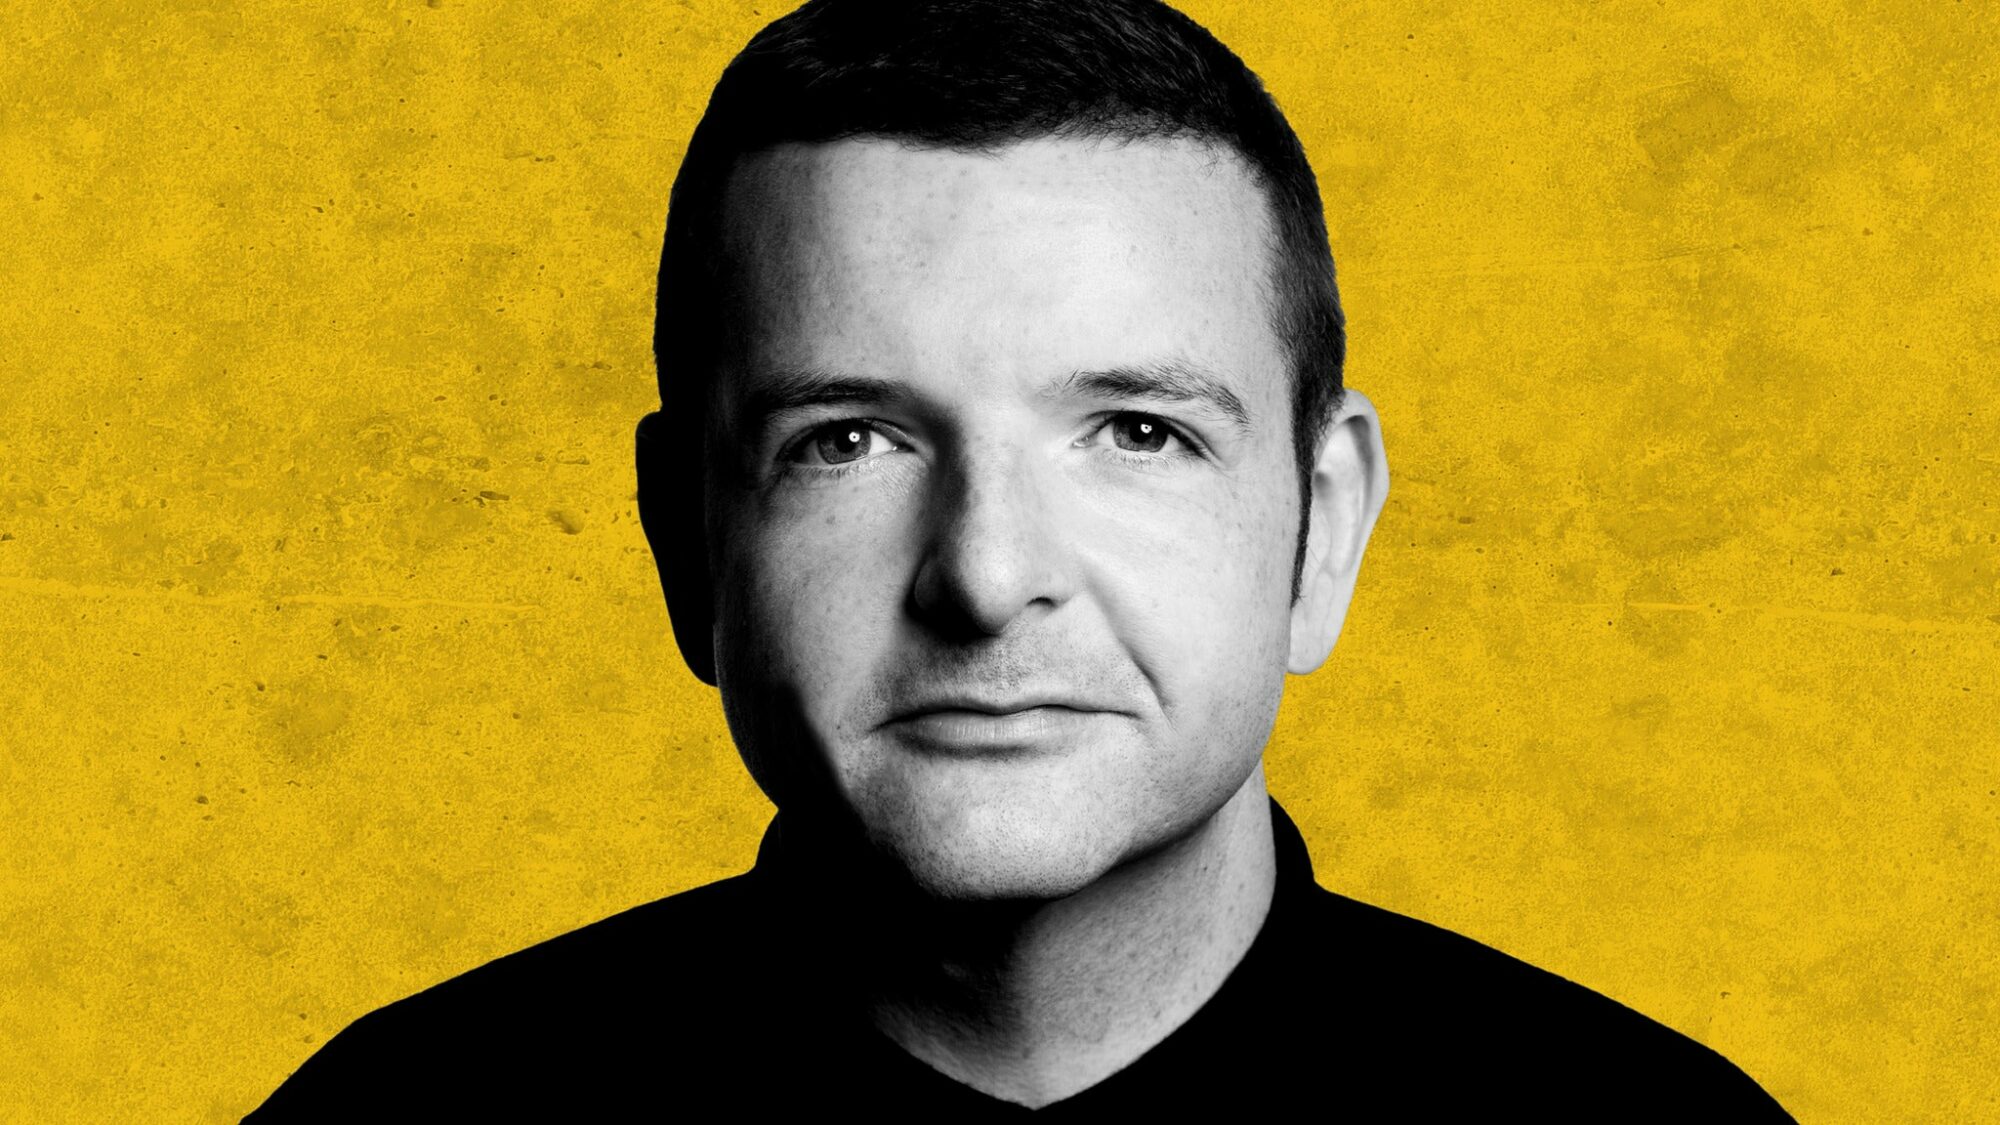 Image name Kevin Bridges The Overdue Catch Up at Leeds Grand Theatre Leeds the 19 image from the post Kevin Bridges: The Overdue Catch-Up at Leeds Grand Theatre, Leeds in Yorkshire.com.